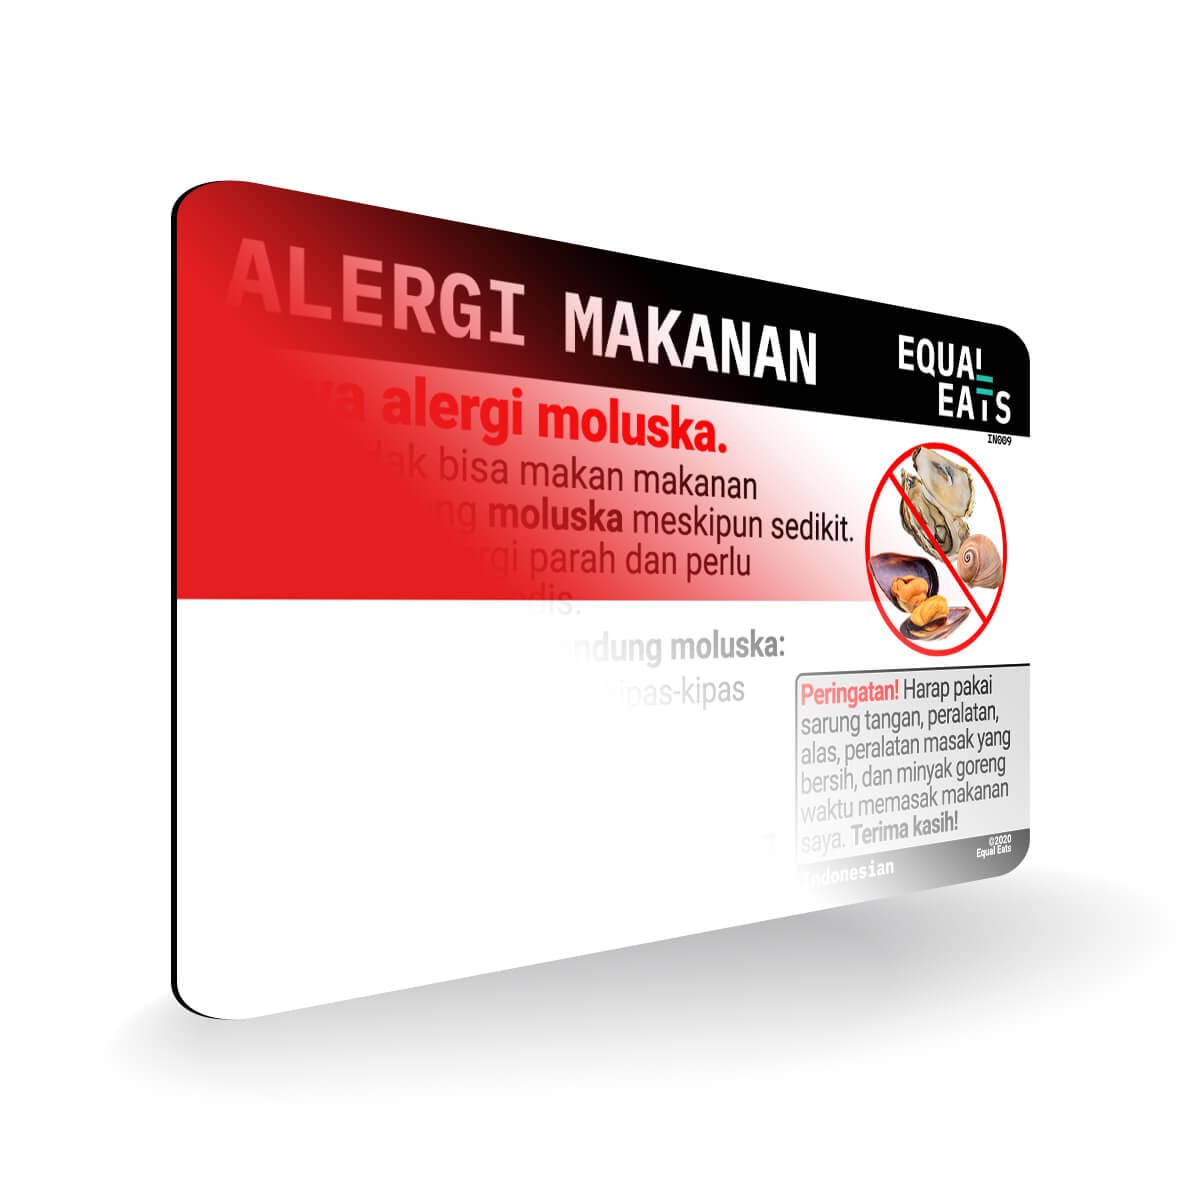 Mollusk Allergy in Indonesian. Mollusk Allergy Card for Indonesia